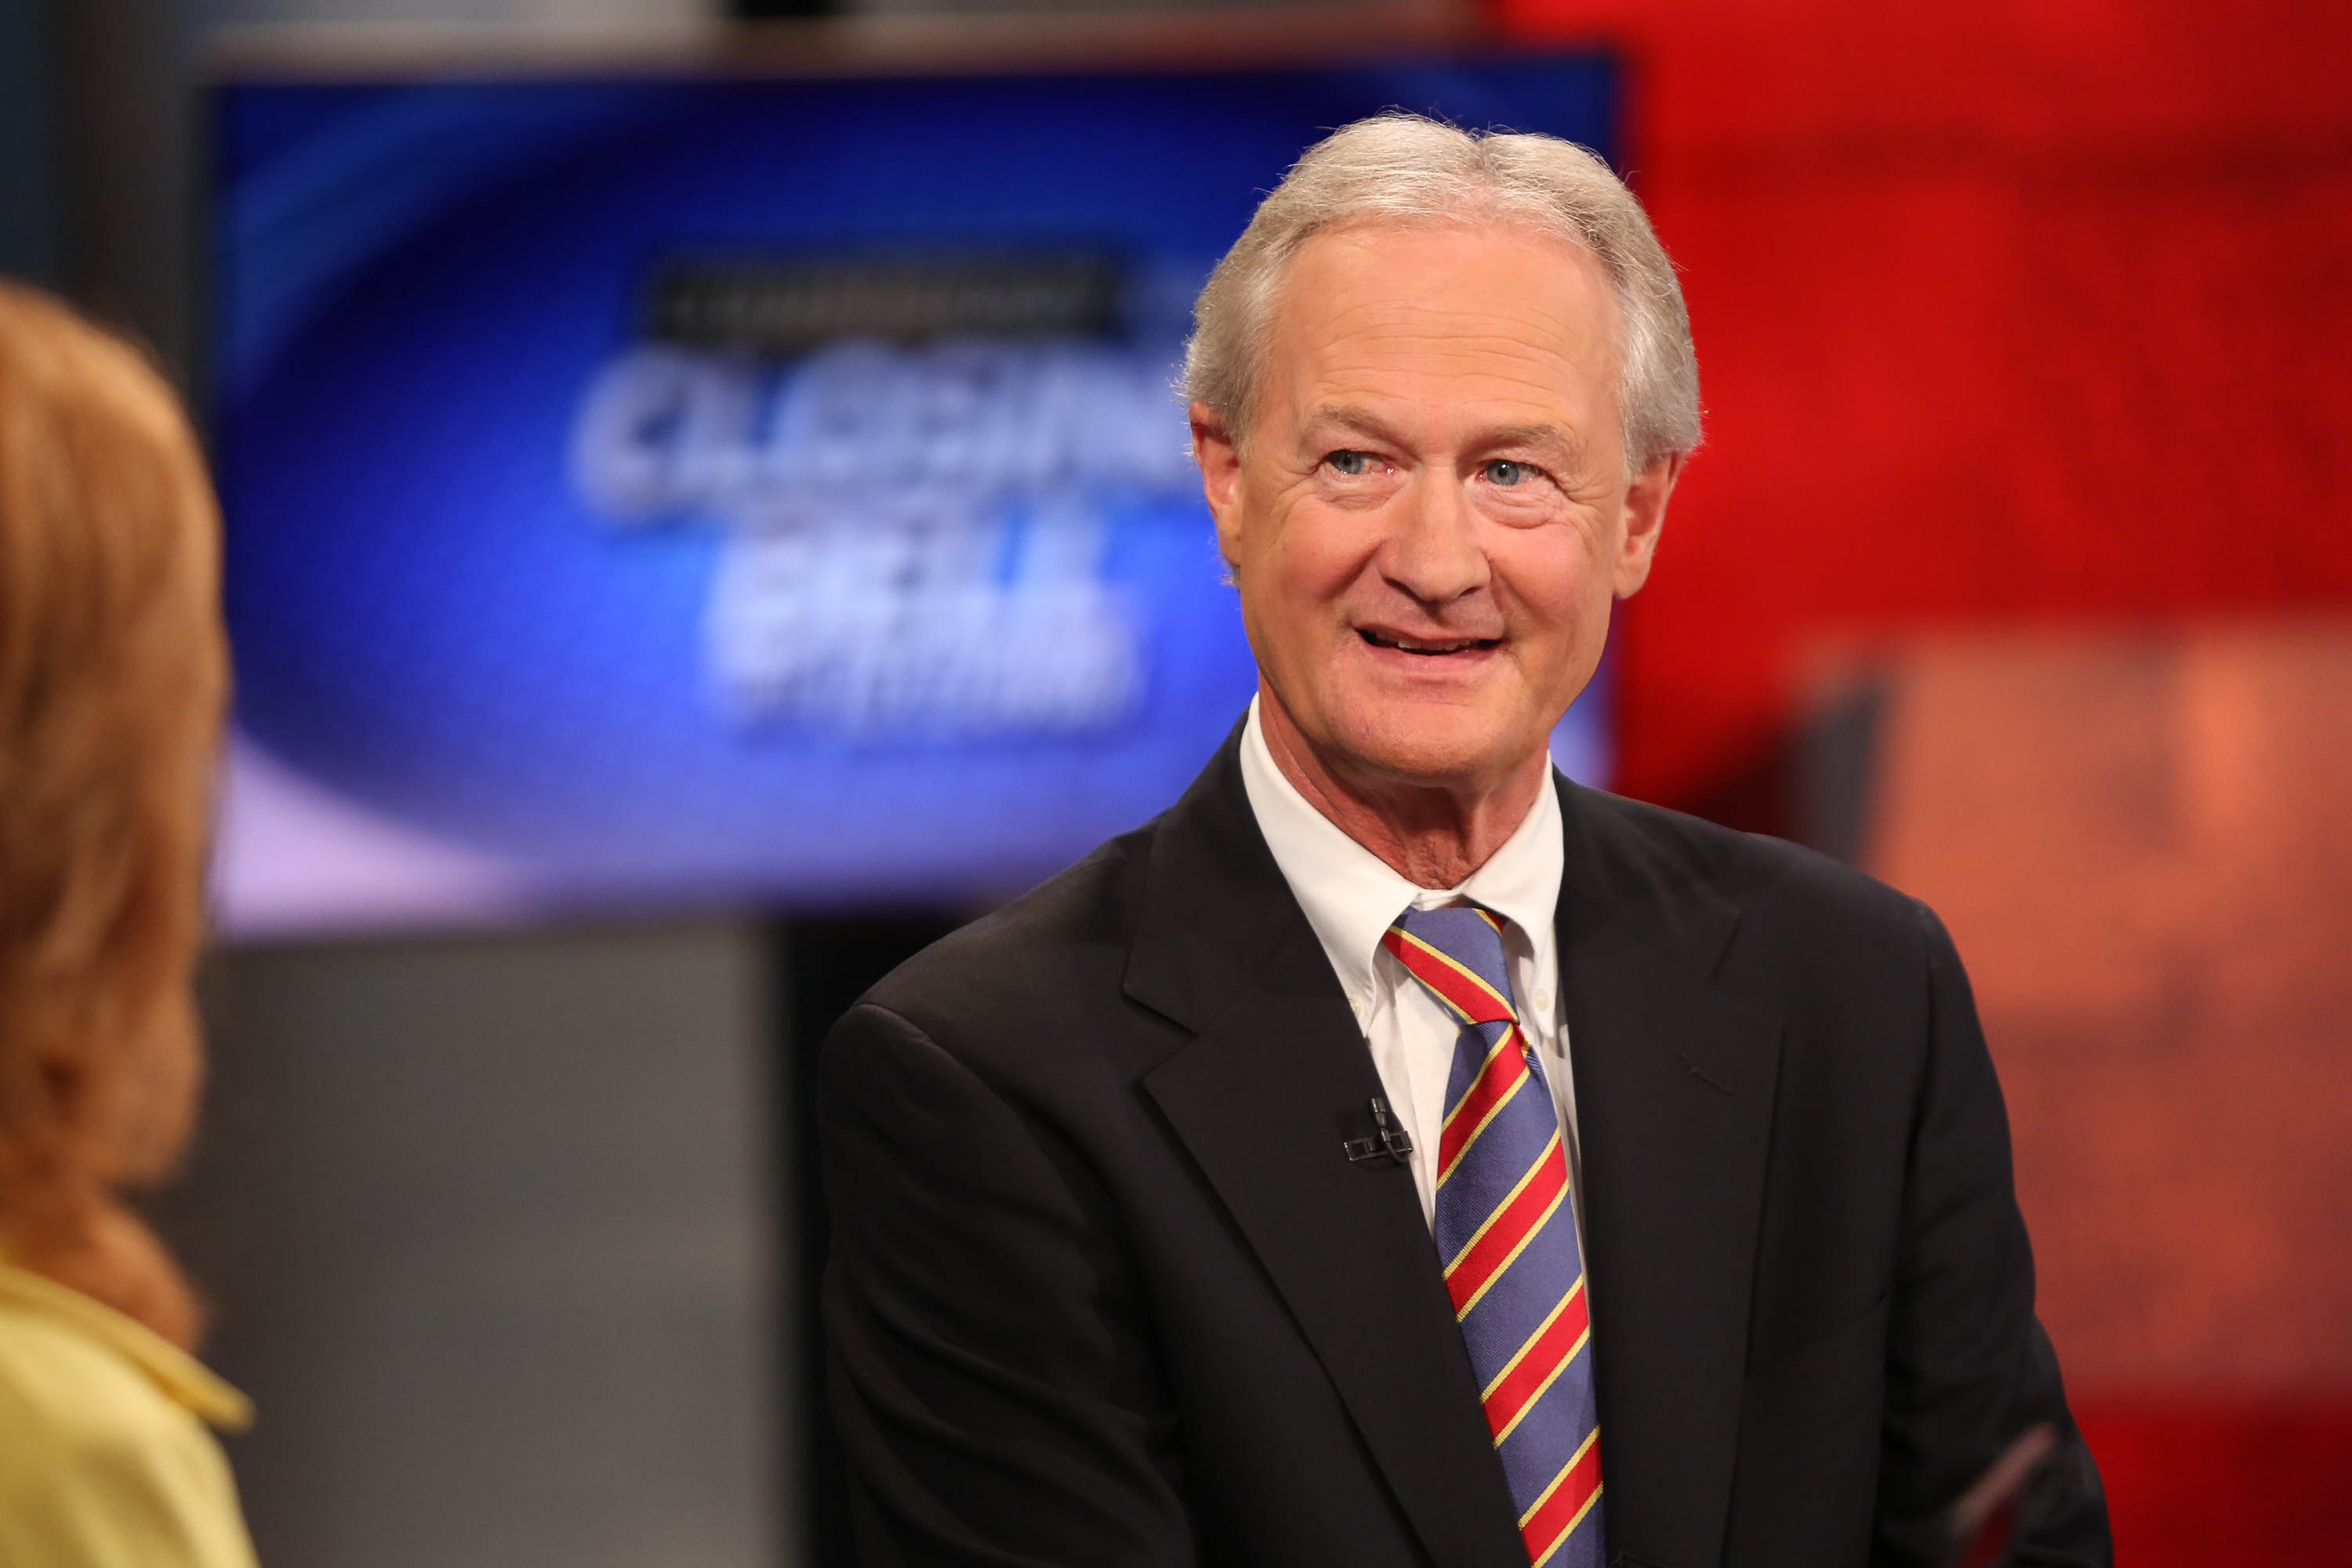 Lincoln Chafee, Lincoln Chafee net worth